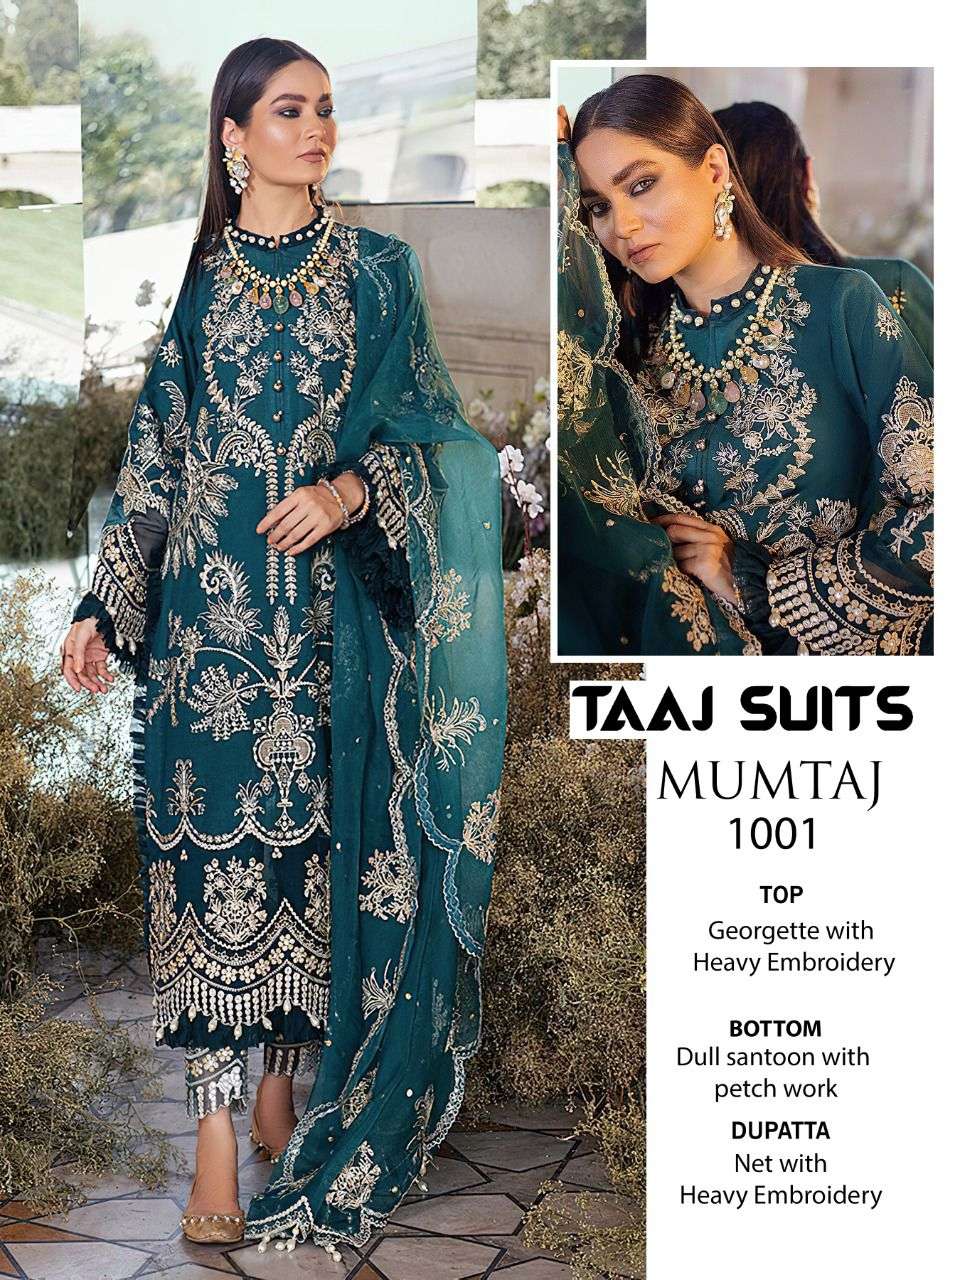 taaj suits mumtaz seires 1001 to 1003 premium collection georgette with heavy embroidery pakistani suits collection wholesaler of paksitani suits